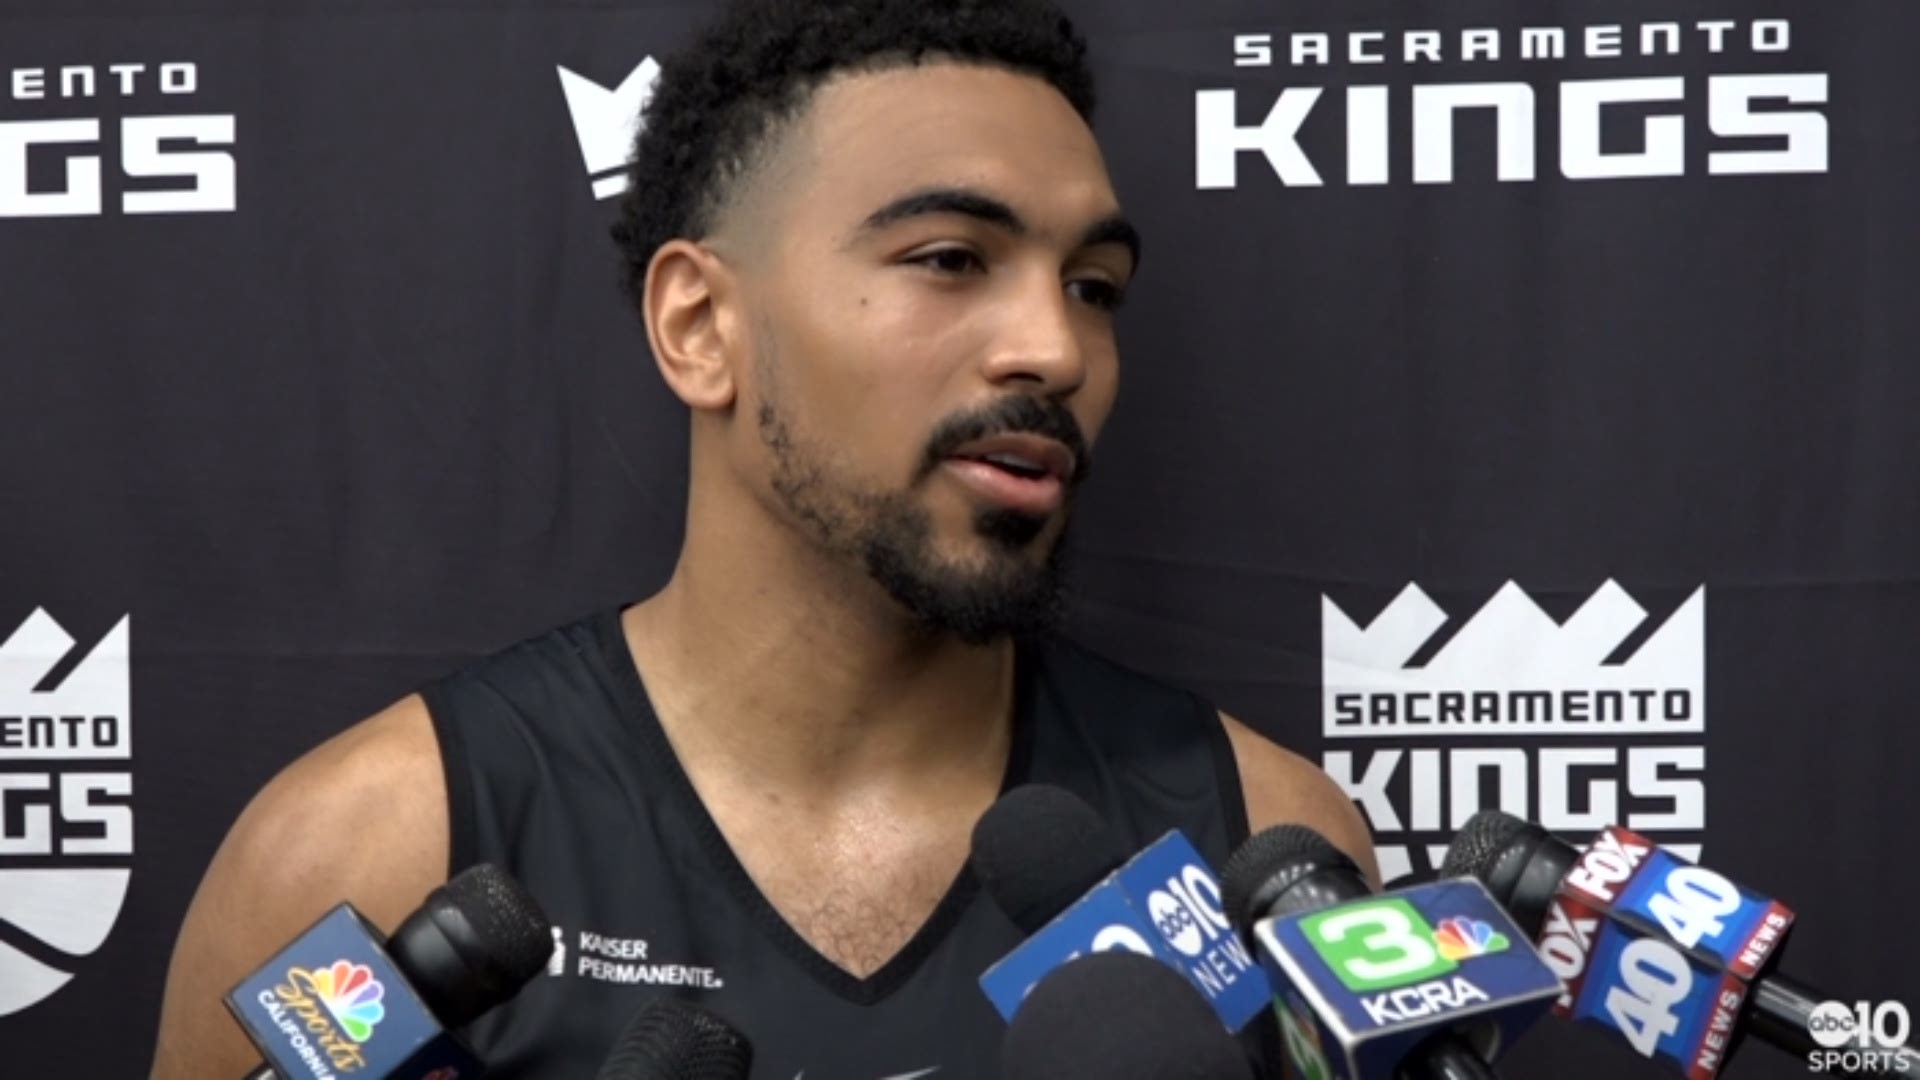 UC Santa Barbara point guard and Stockton native Gabe Vincent talks about his draft workout in Sacramento with the Kings on Monday, his bounce-back season following an ACL injury in his junior season and coming from St. Mary's High School.